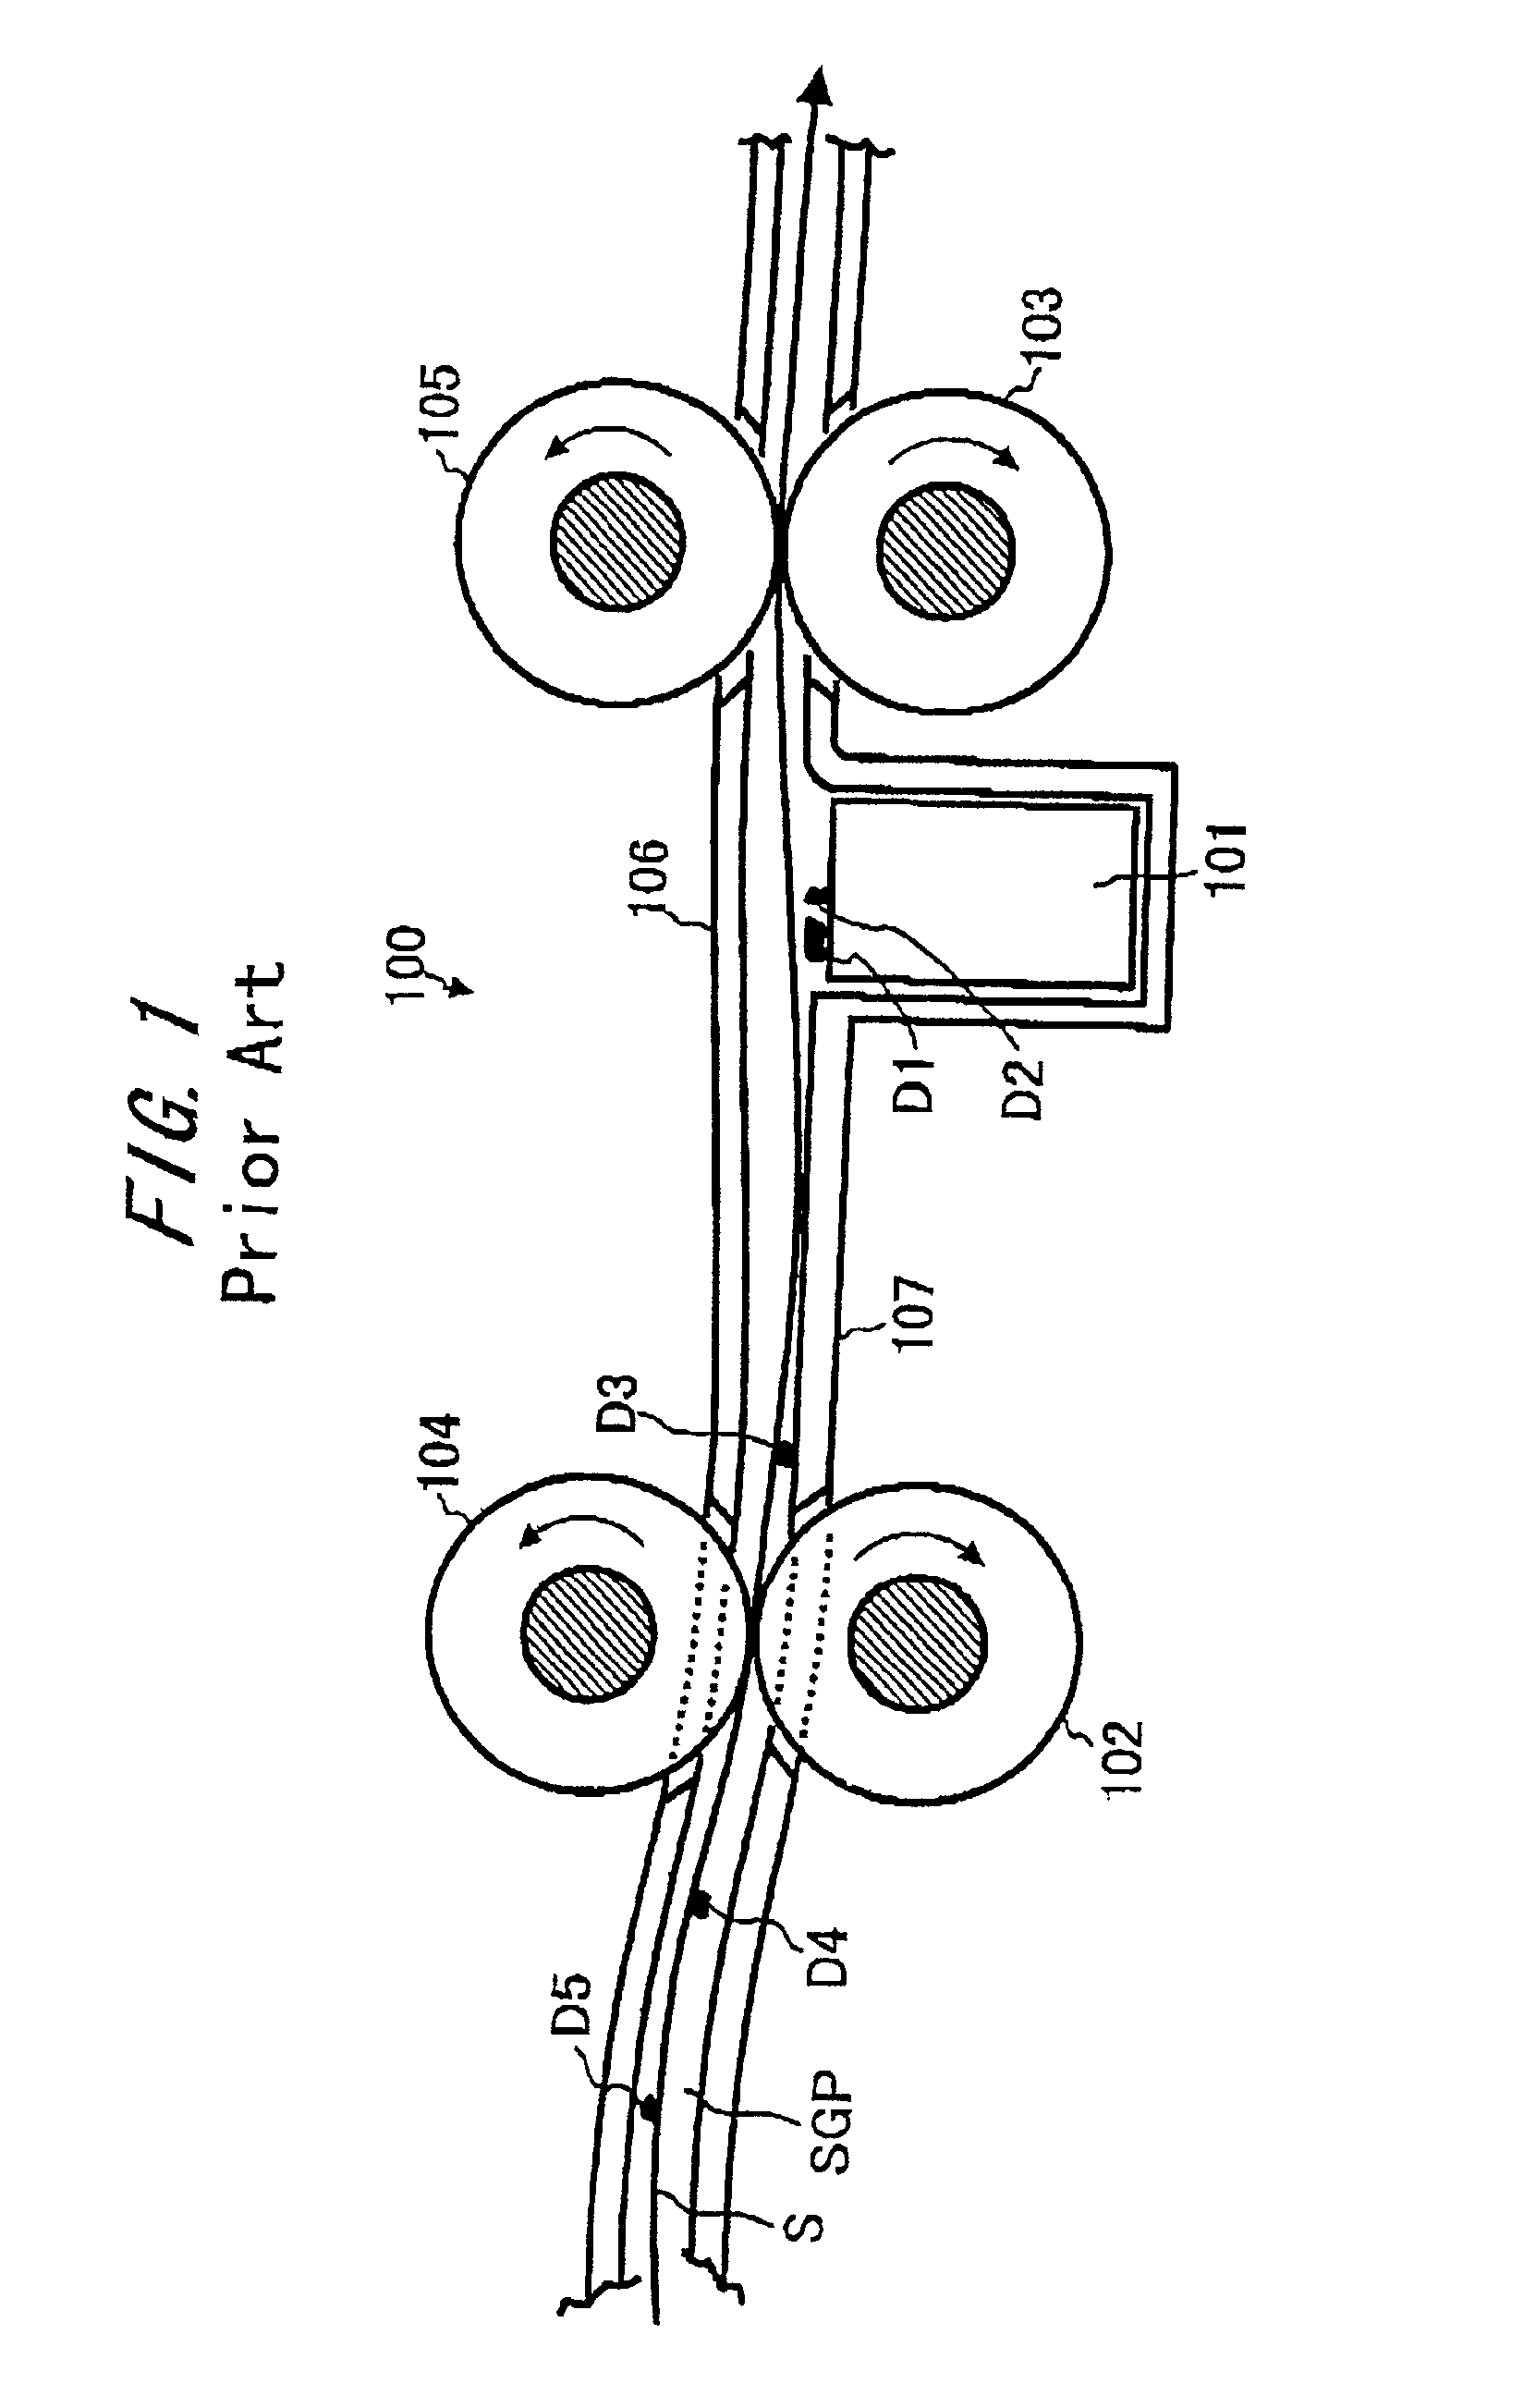 Image reading apparatus and an image processing system having a dirt trapping device